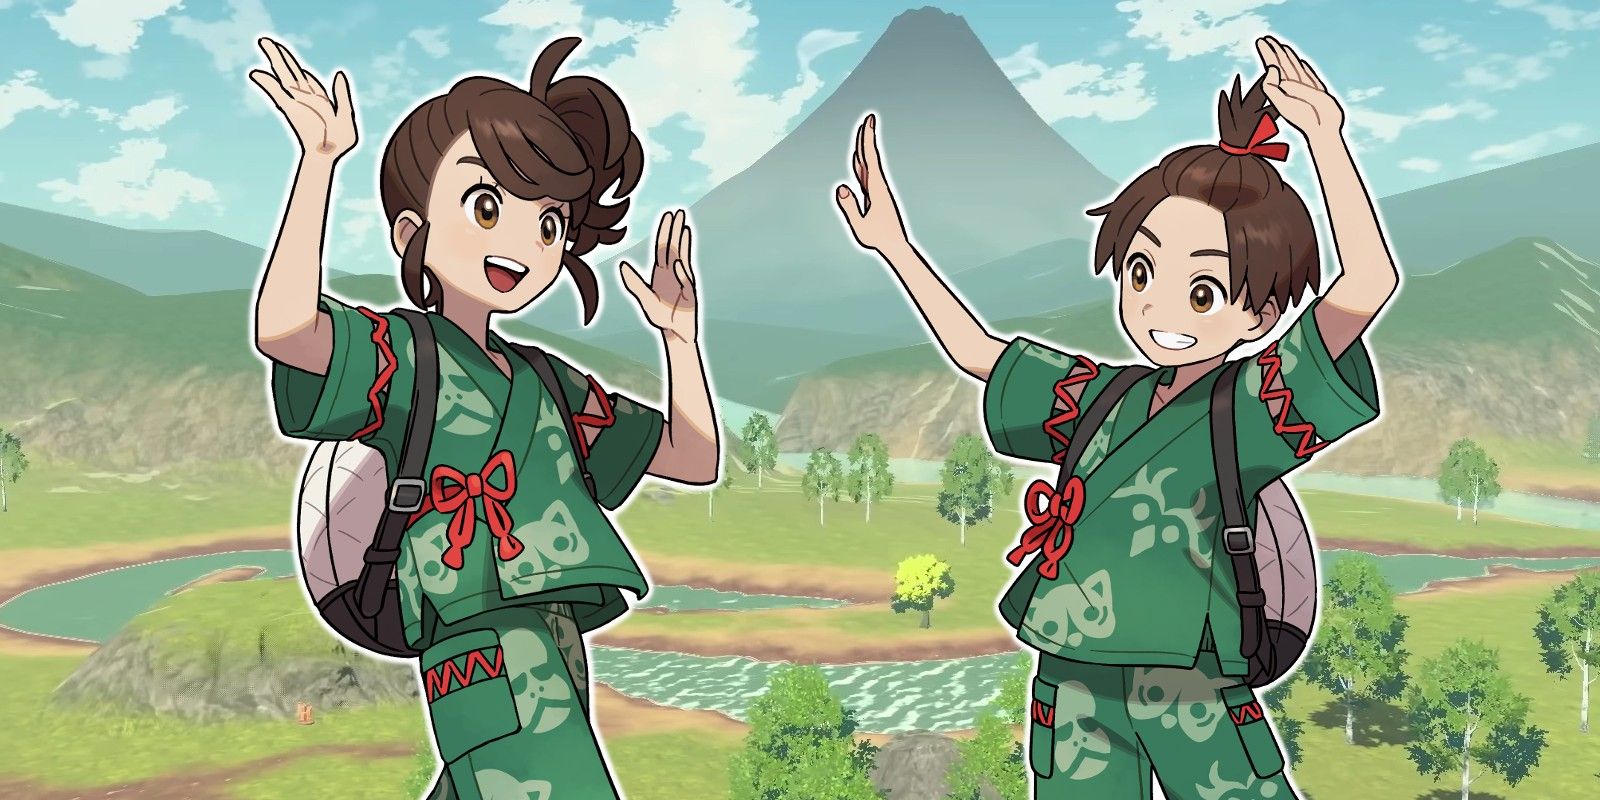 Pokémon Scarlet and Violet's Florian and Juliana in their Teal Mask festival outfits with the landscape of Hisui from Pokémon Legends: Arceus in the background.